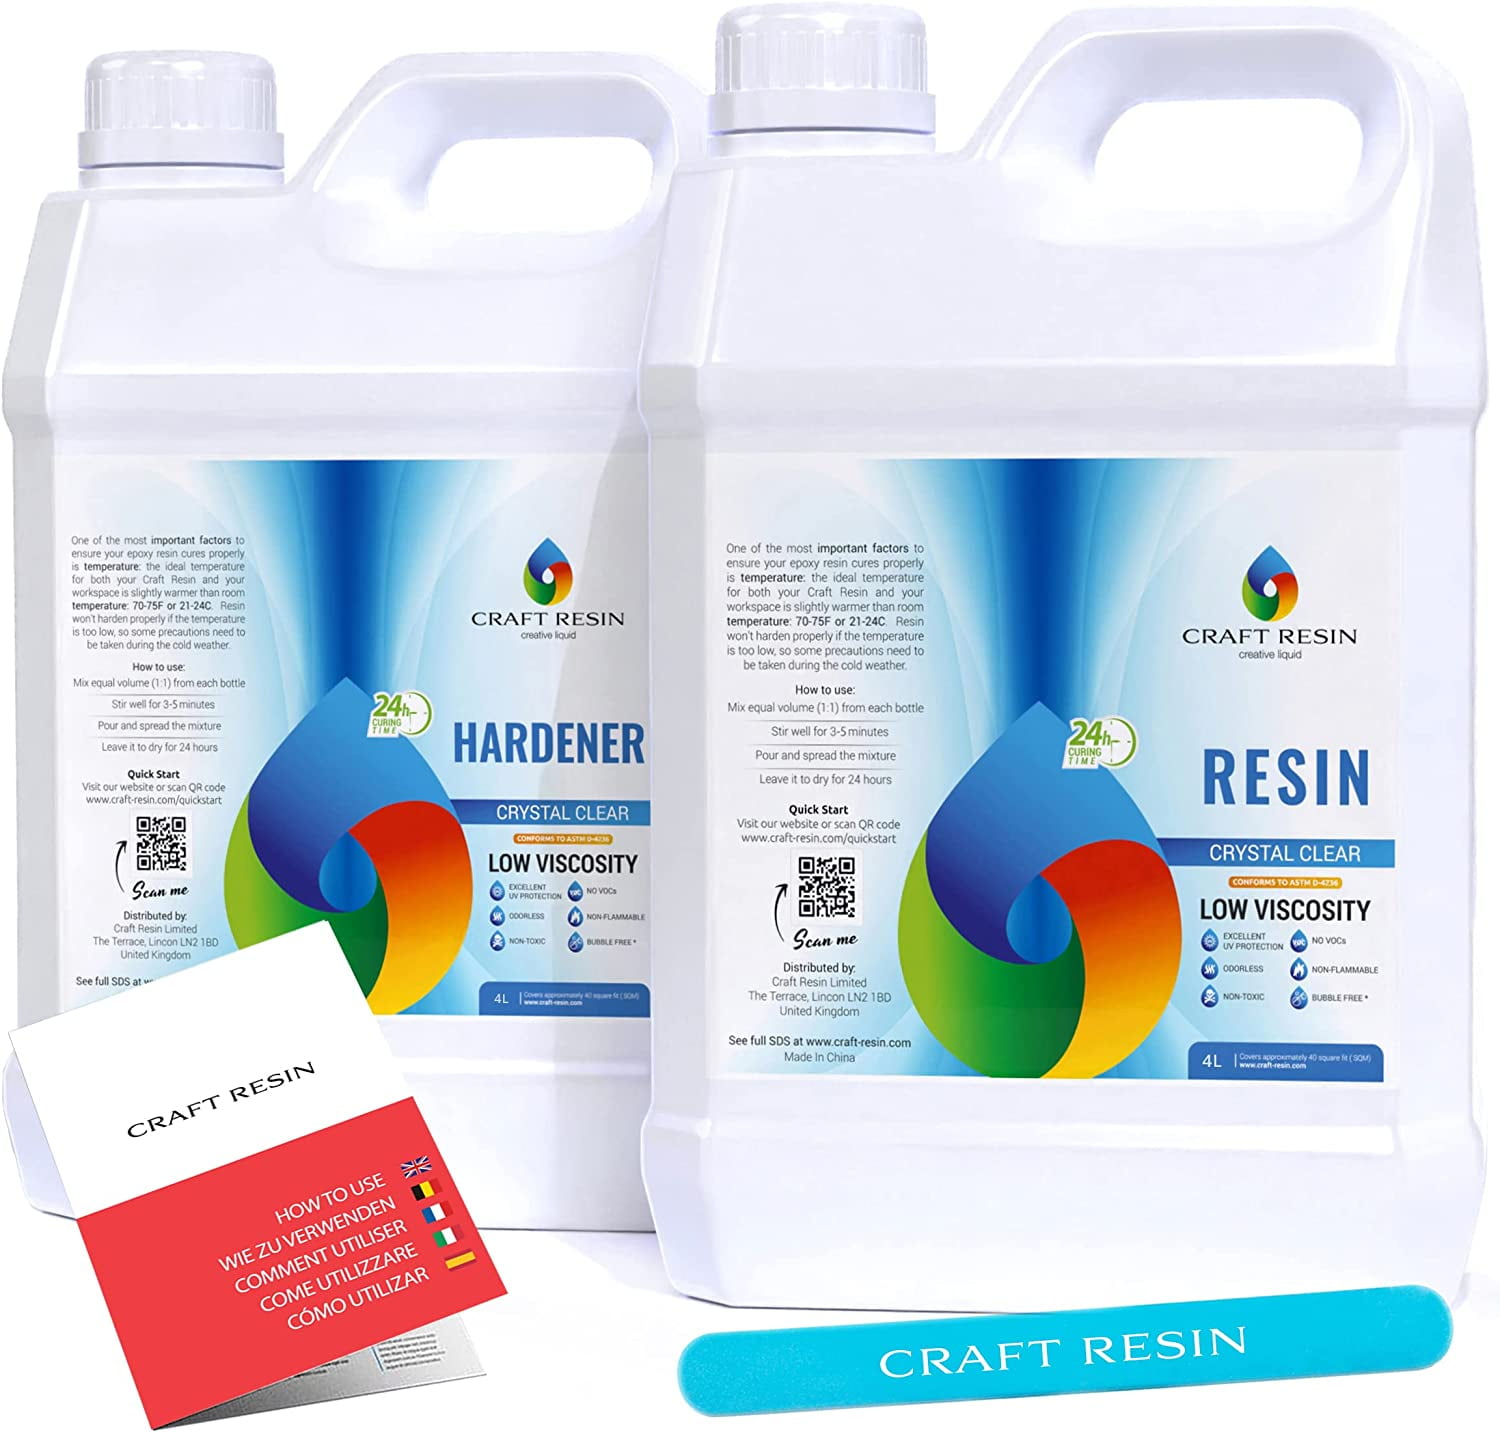 Craft Resin 2 Gallon Epoxy Resin Kit - Crystal Clear Epoxy Resin Kit &  Hardener for DIY Art, Mold Casting, Wood, Jewelry Making, Coasters, Table  Top - Food Safe, Heat & UV